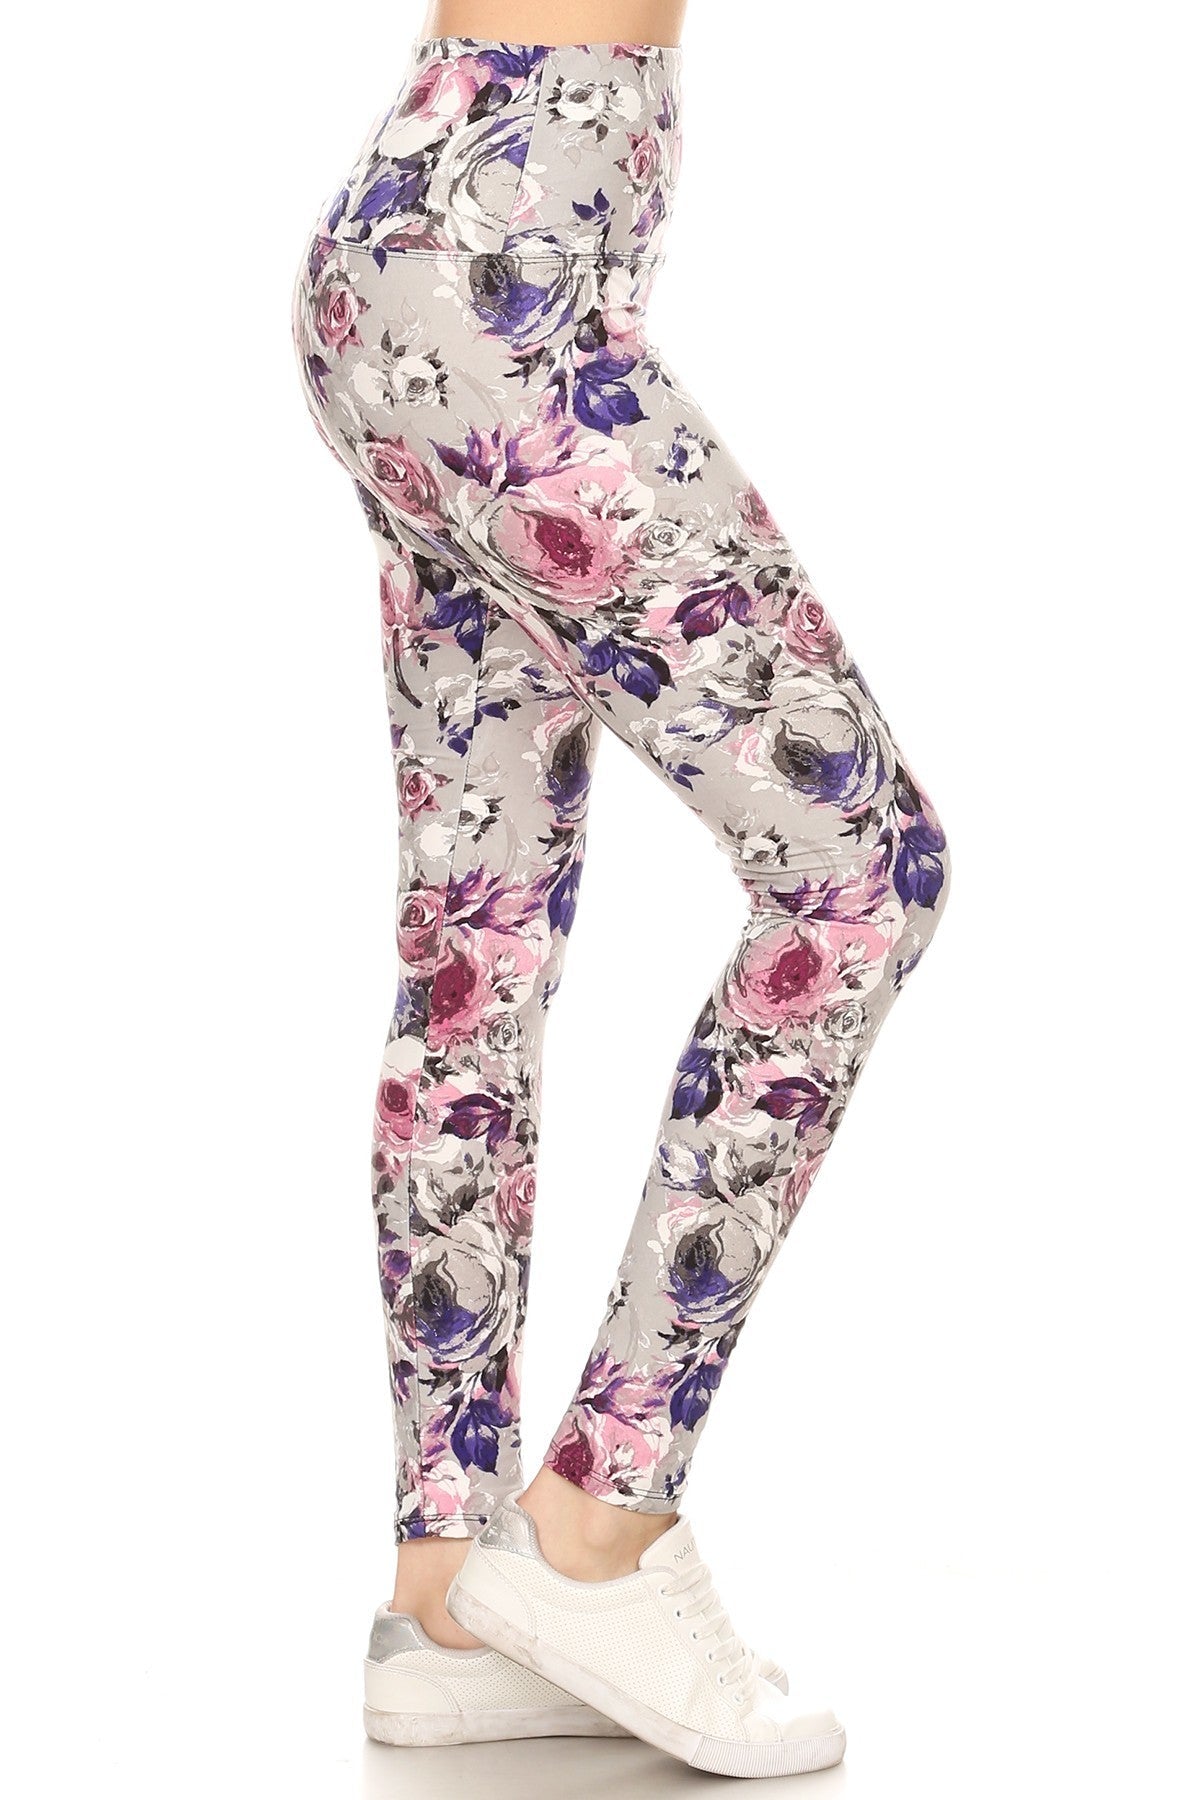 5-inch Long Yoga Style Banded Lined Floral Printed Knit Legging With High Waist - Fashion Quality Boutik